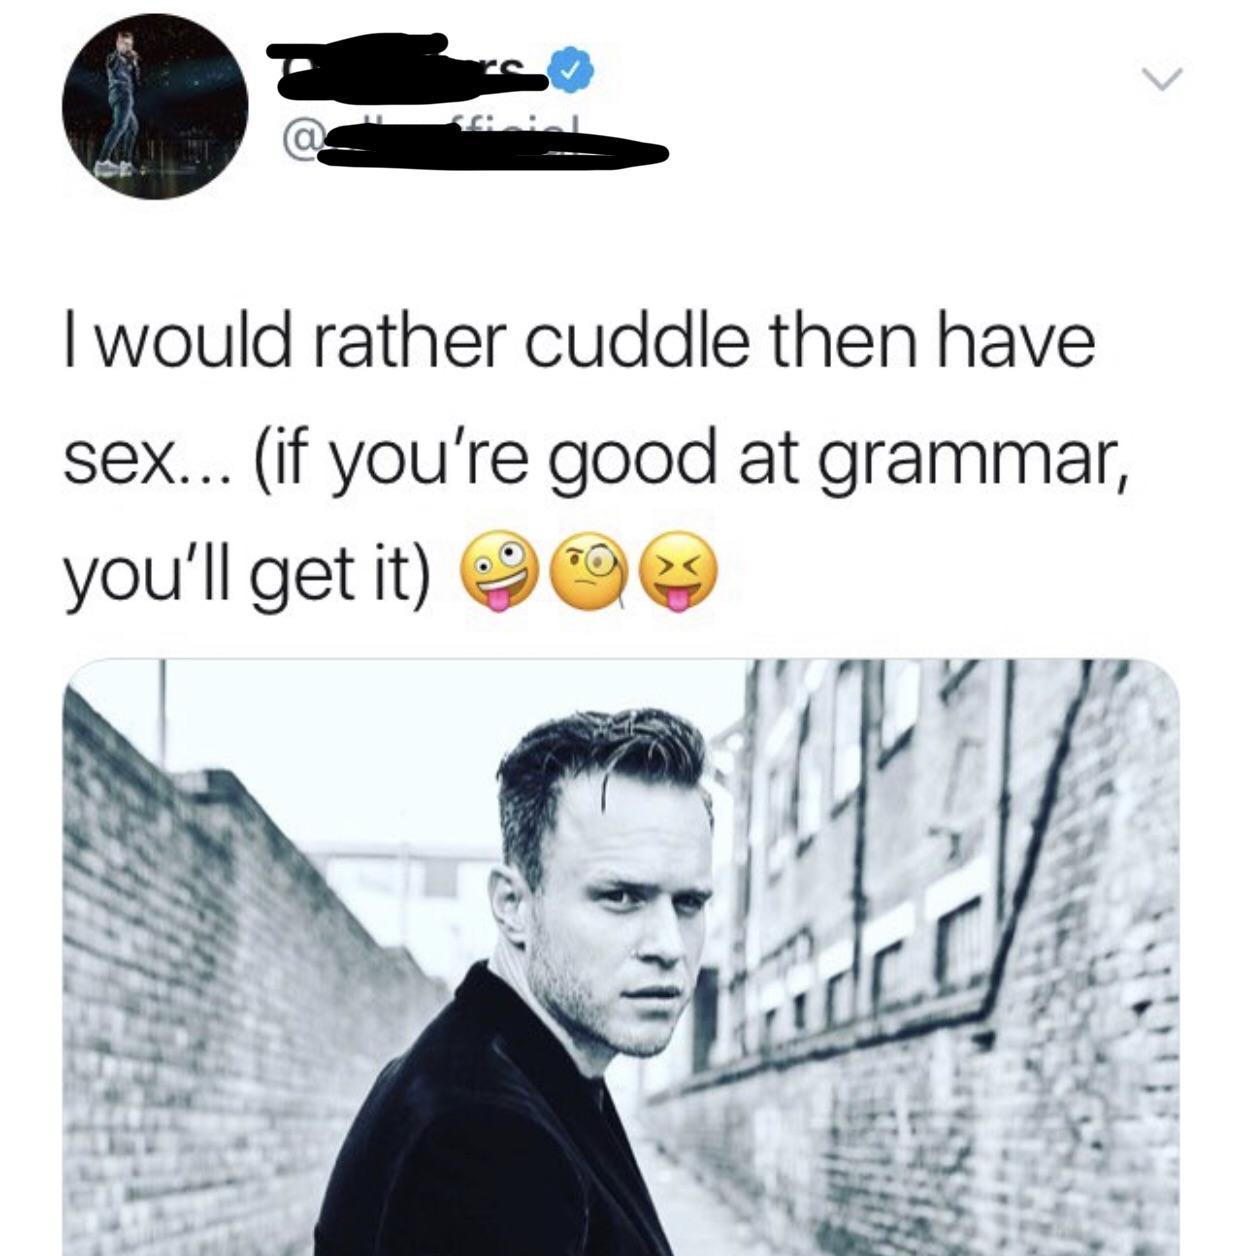 olly murs cuddle tweet - I would rather cuddle then have sex... if you're good at grammar, you'll get it